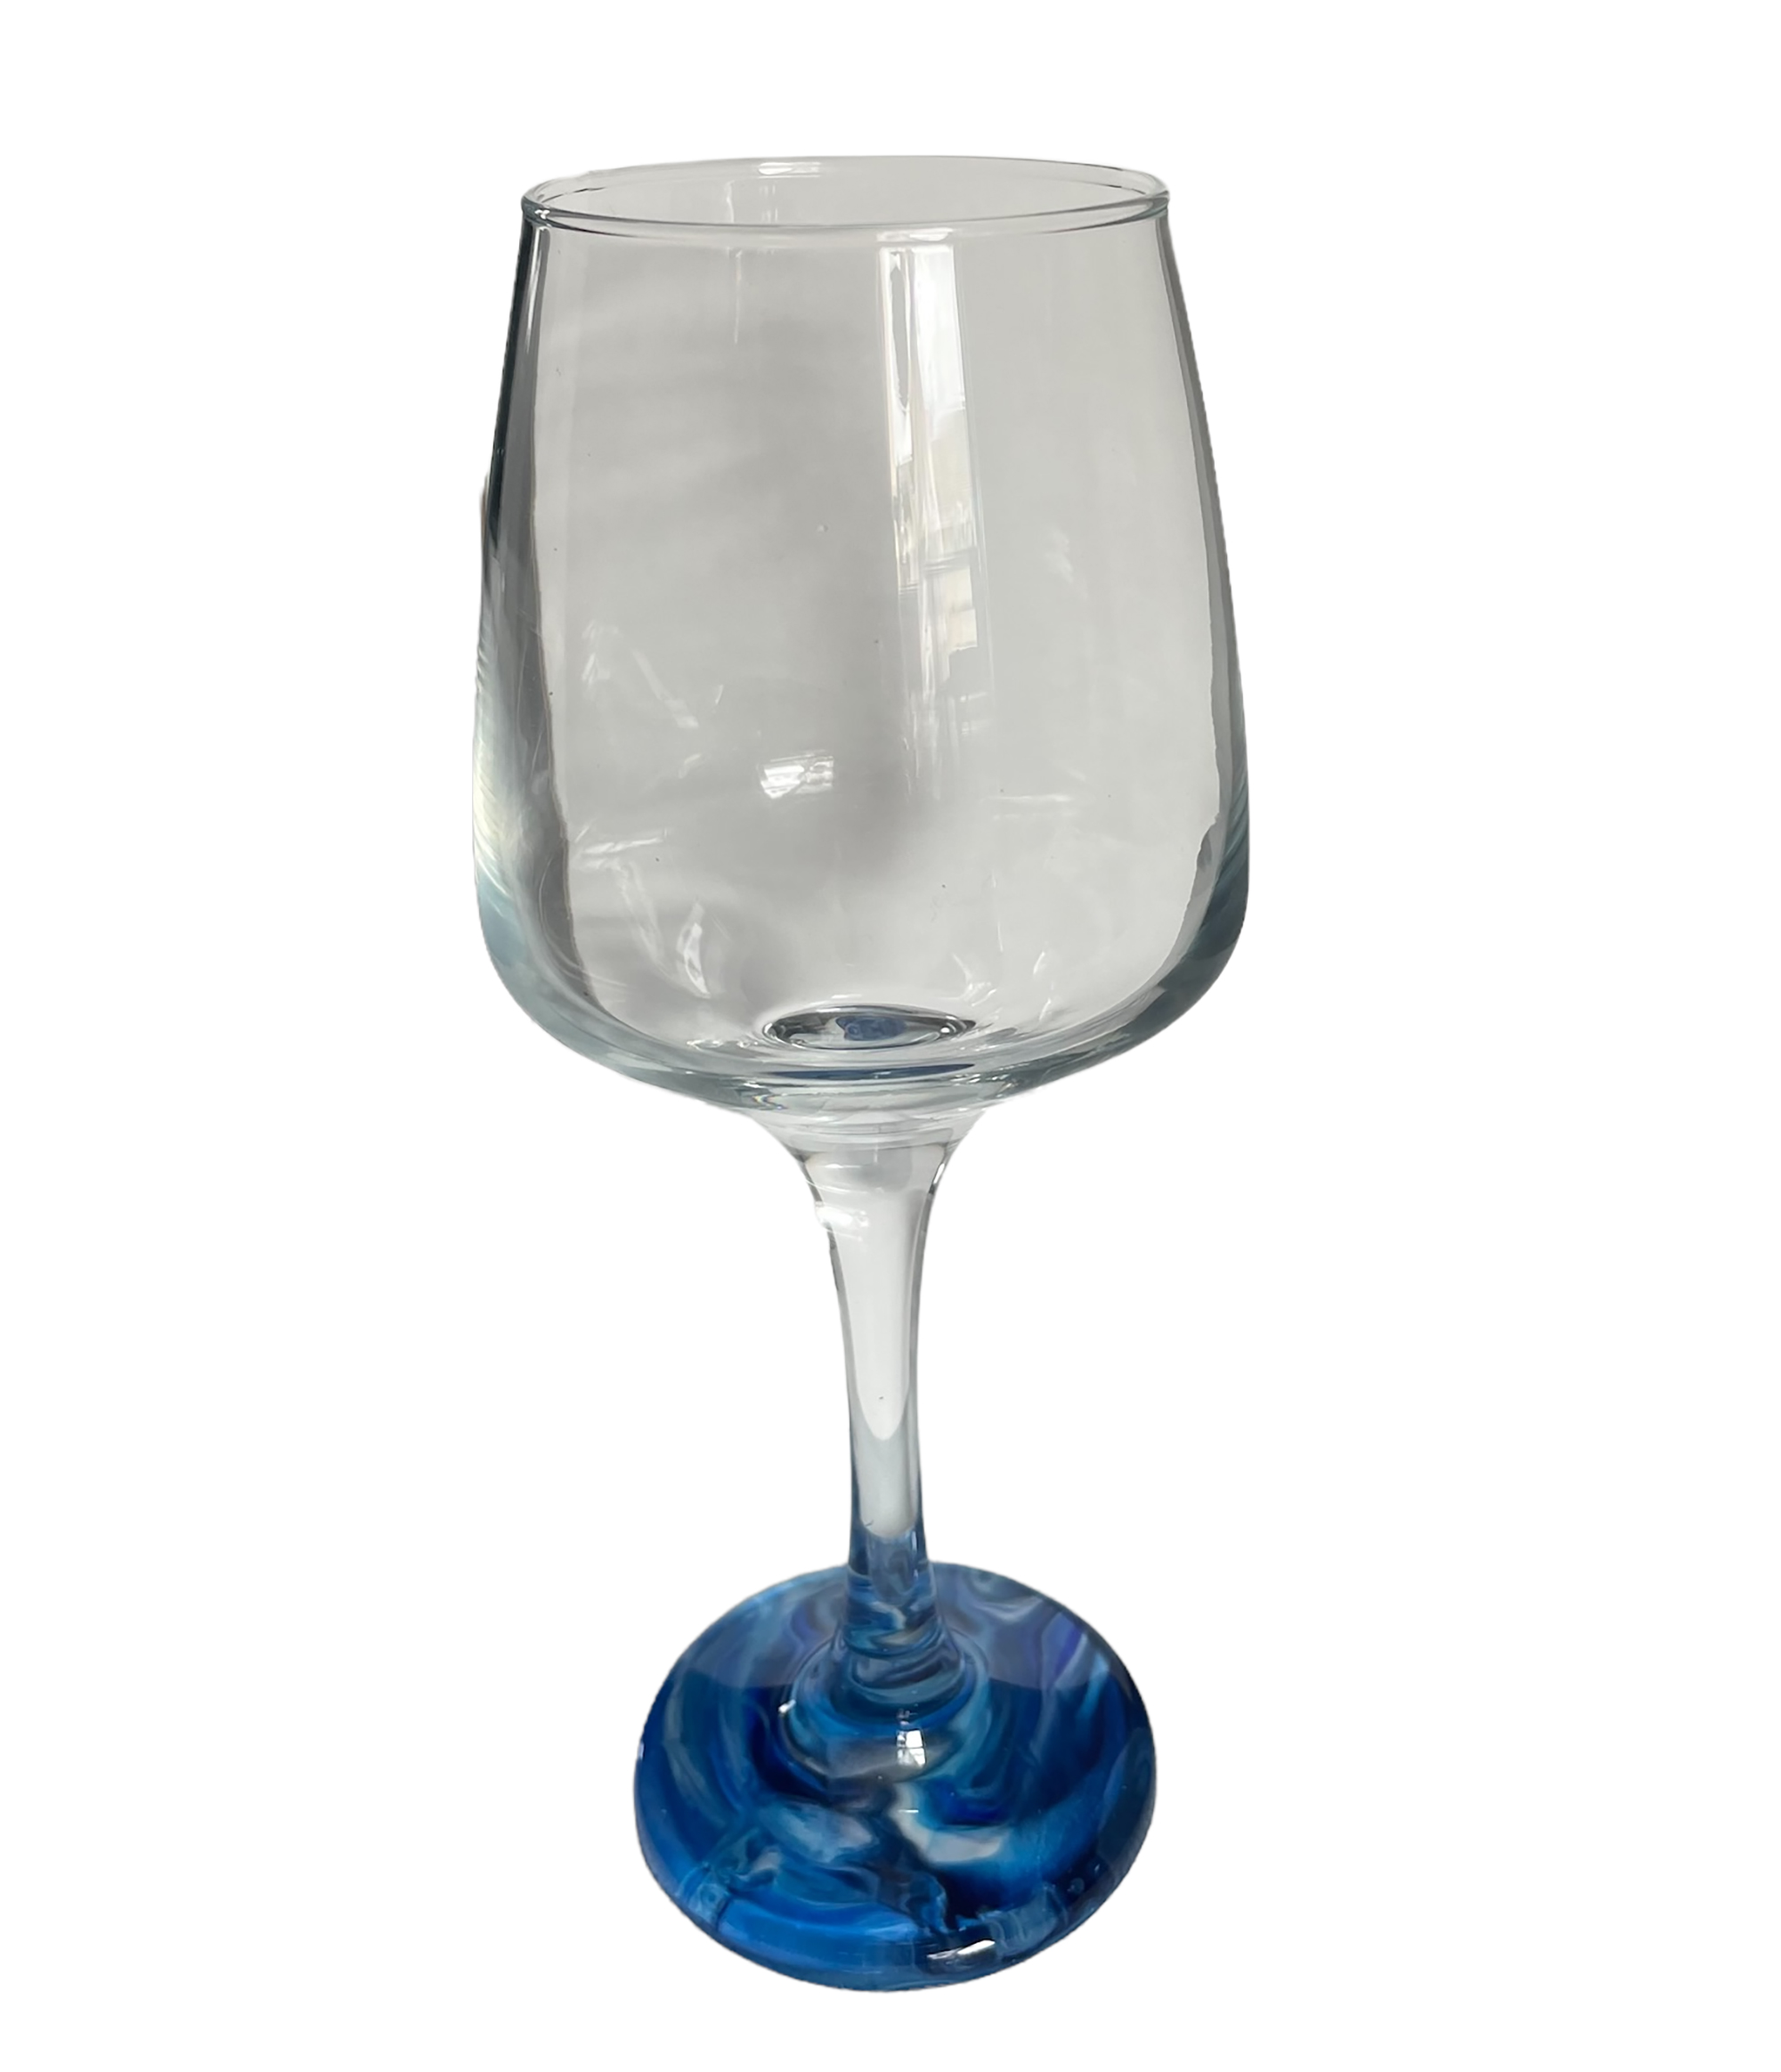 Hand painted wine glass in blues